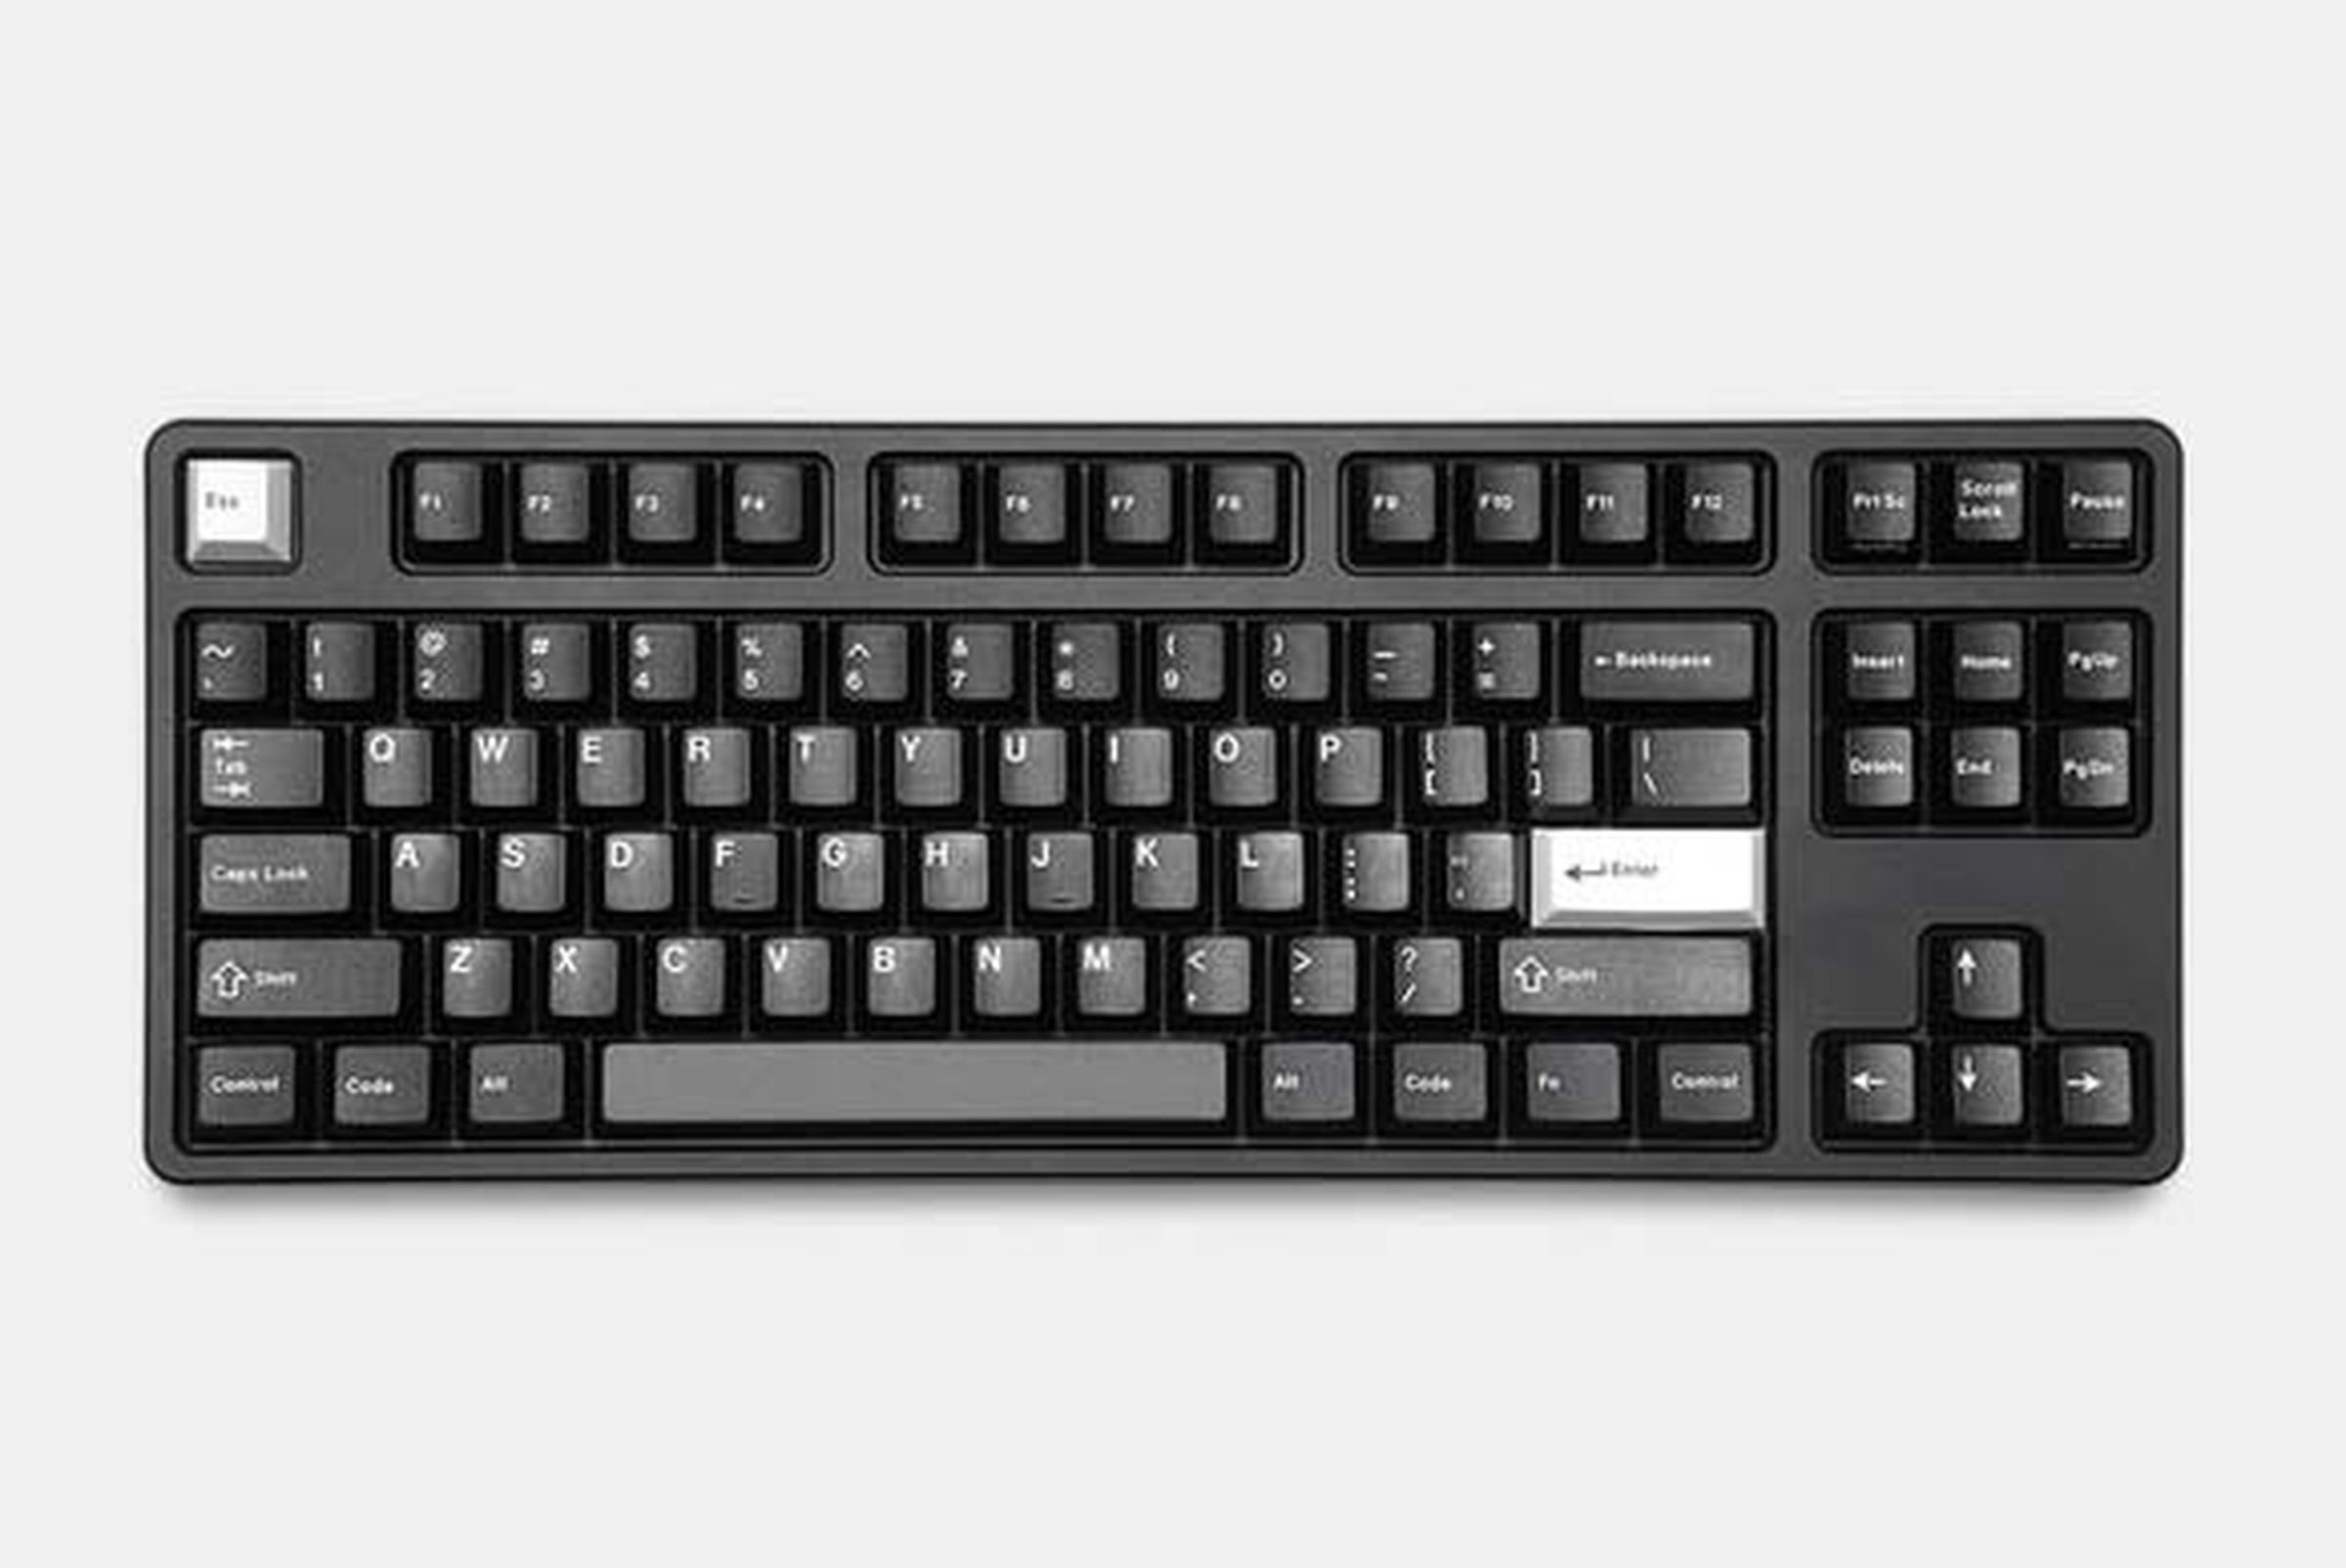 Compared to $110 for an equivalent GMK set.